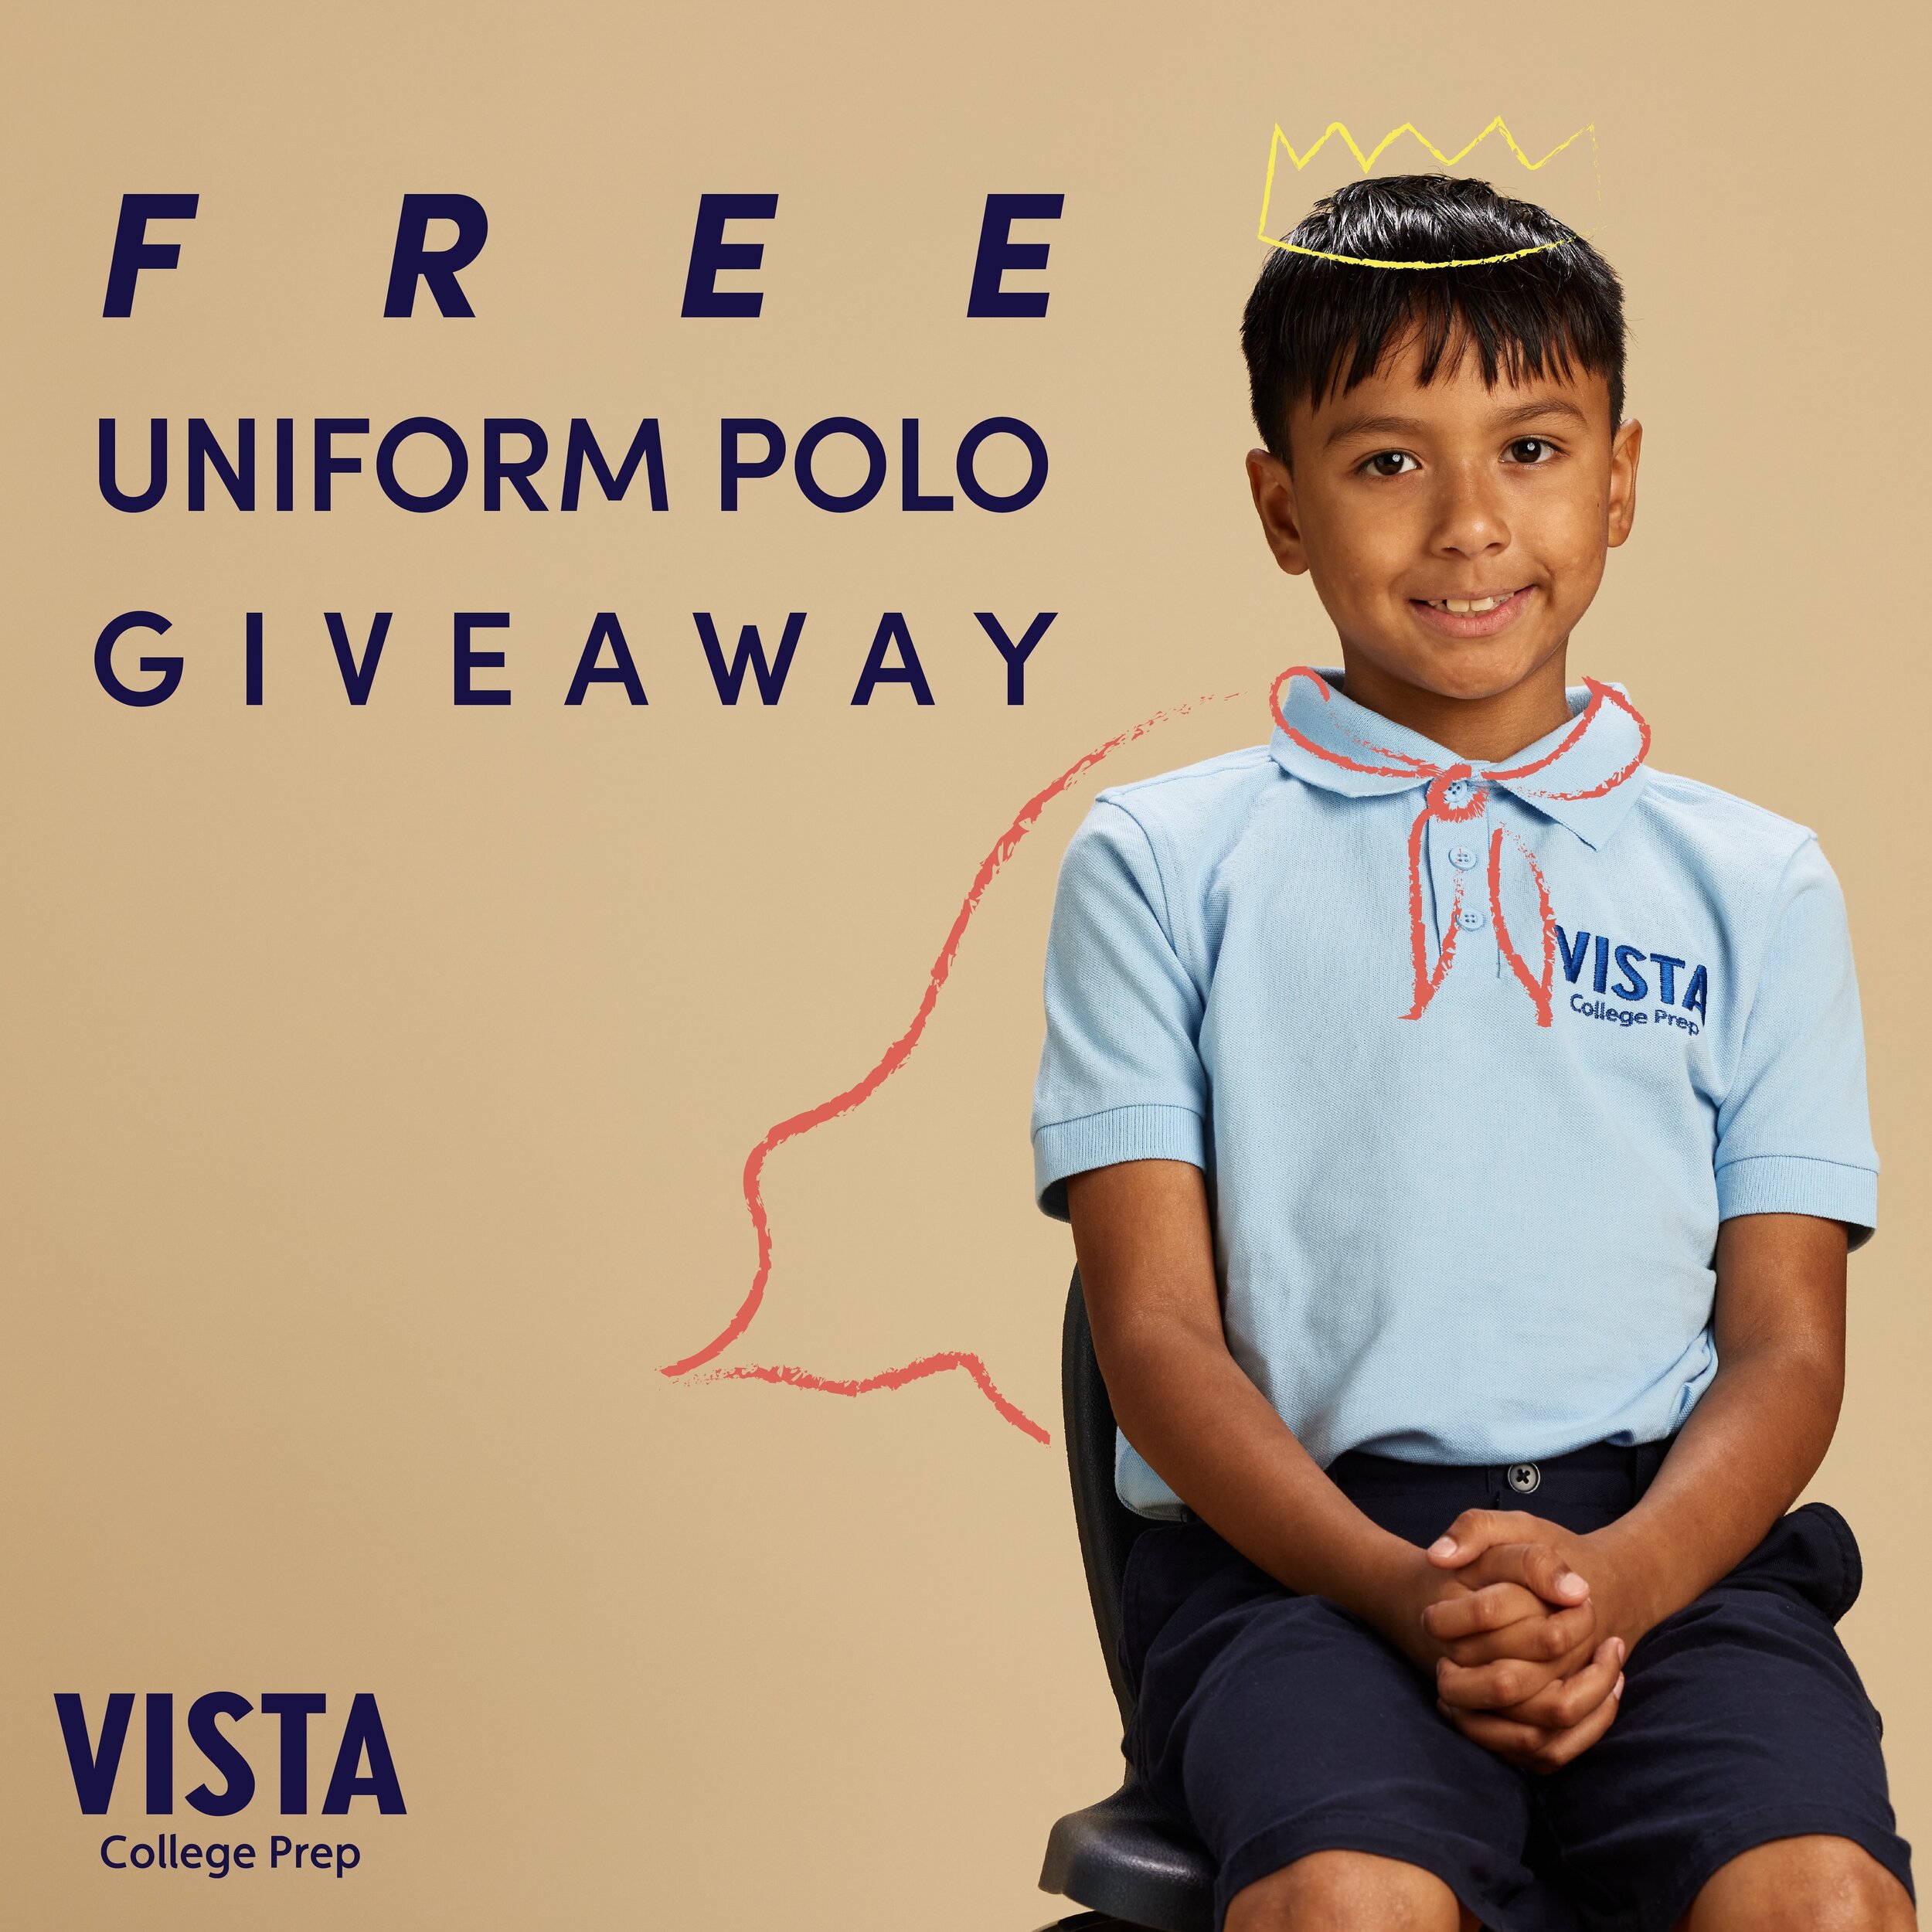 FREE Uniform Polo Giveaway for every family who refers a new family and they enroll, Vista will give you a FREE embroidered uniform polo. (While supplies last) Contact your front office with your referrals today and help our community grow!
_________